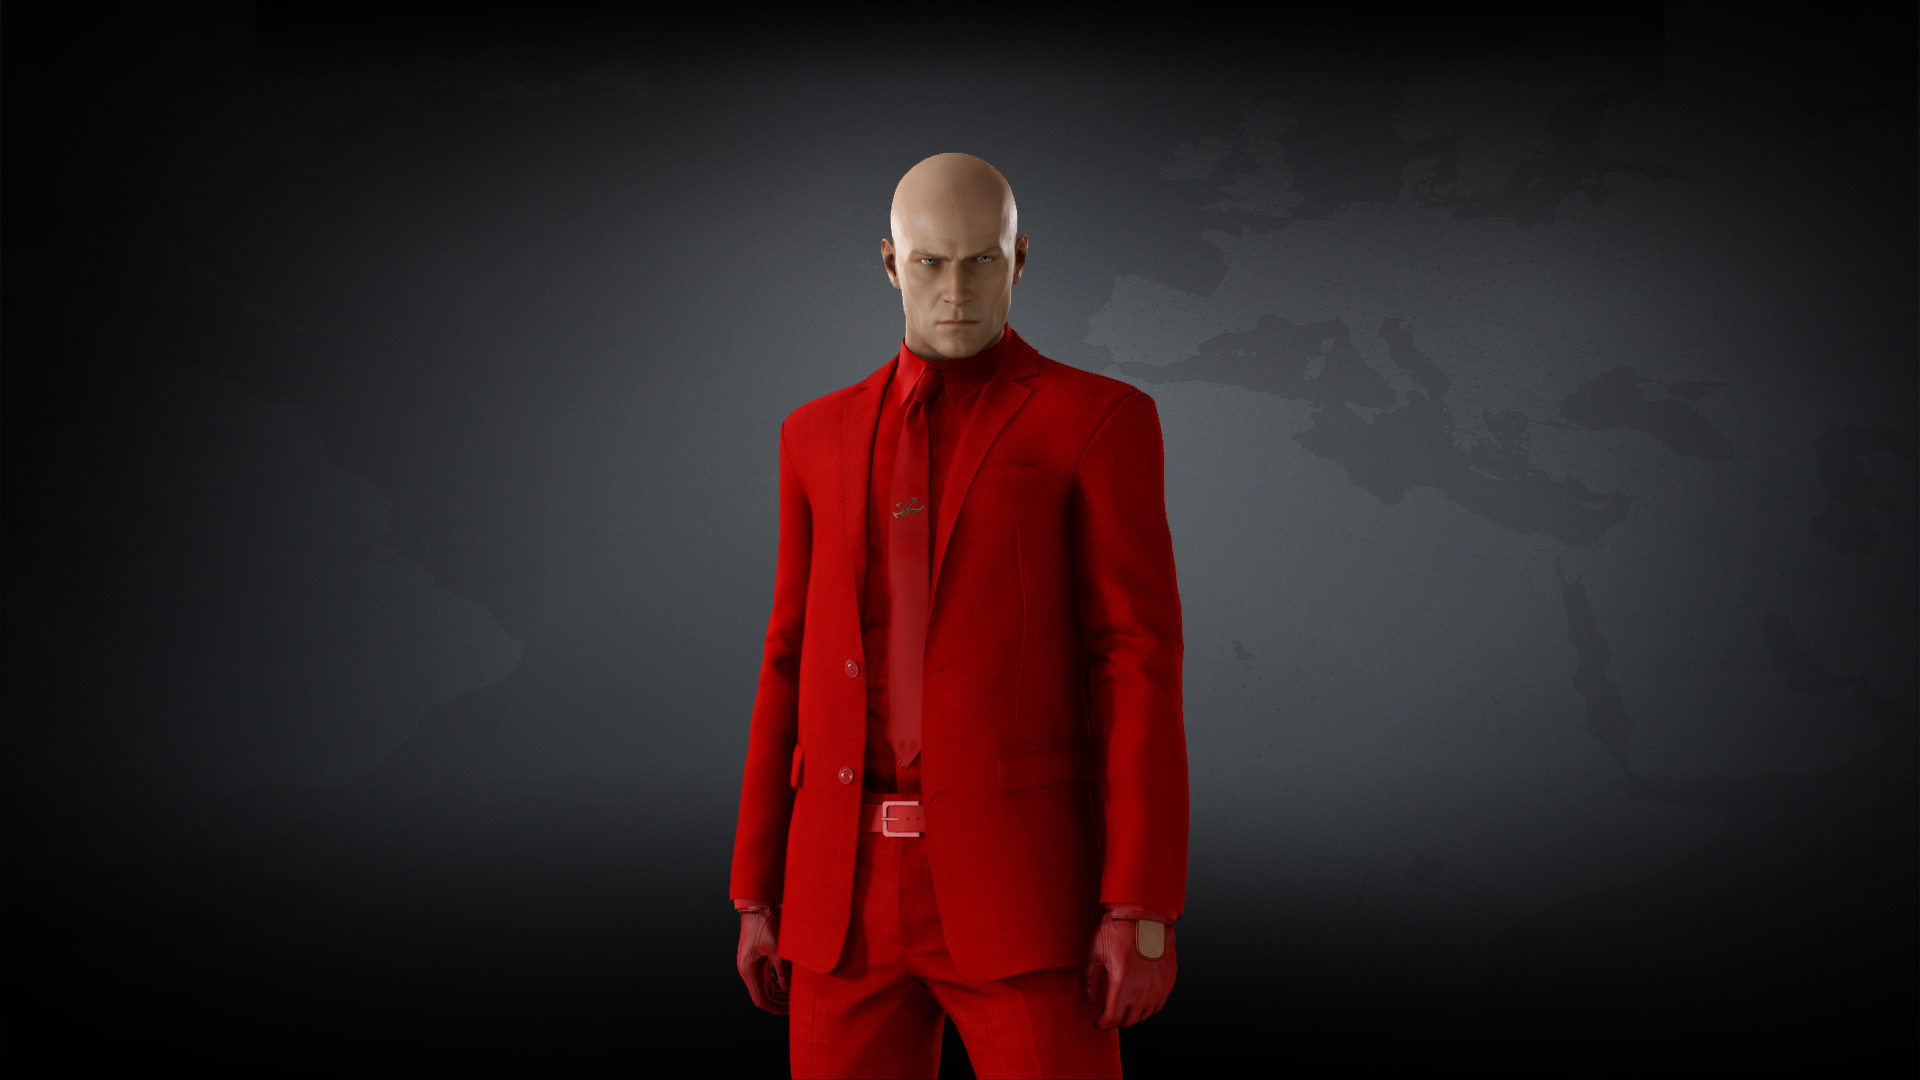 Hitman 3 opens to mixed reviews on Steam